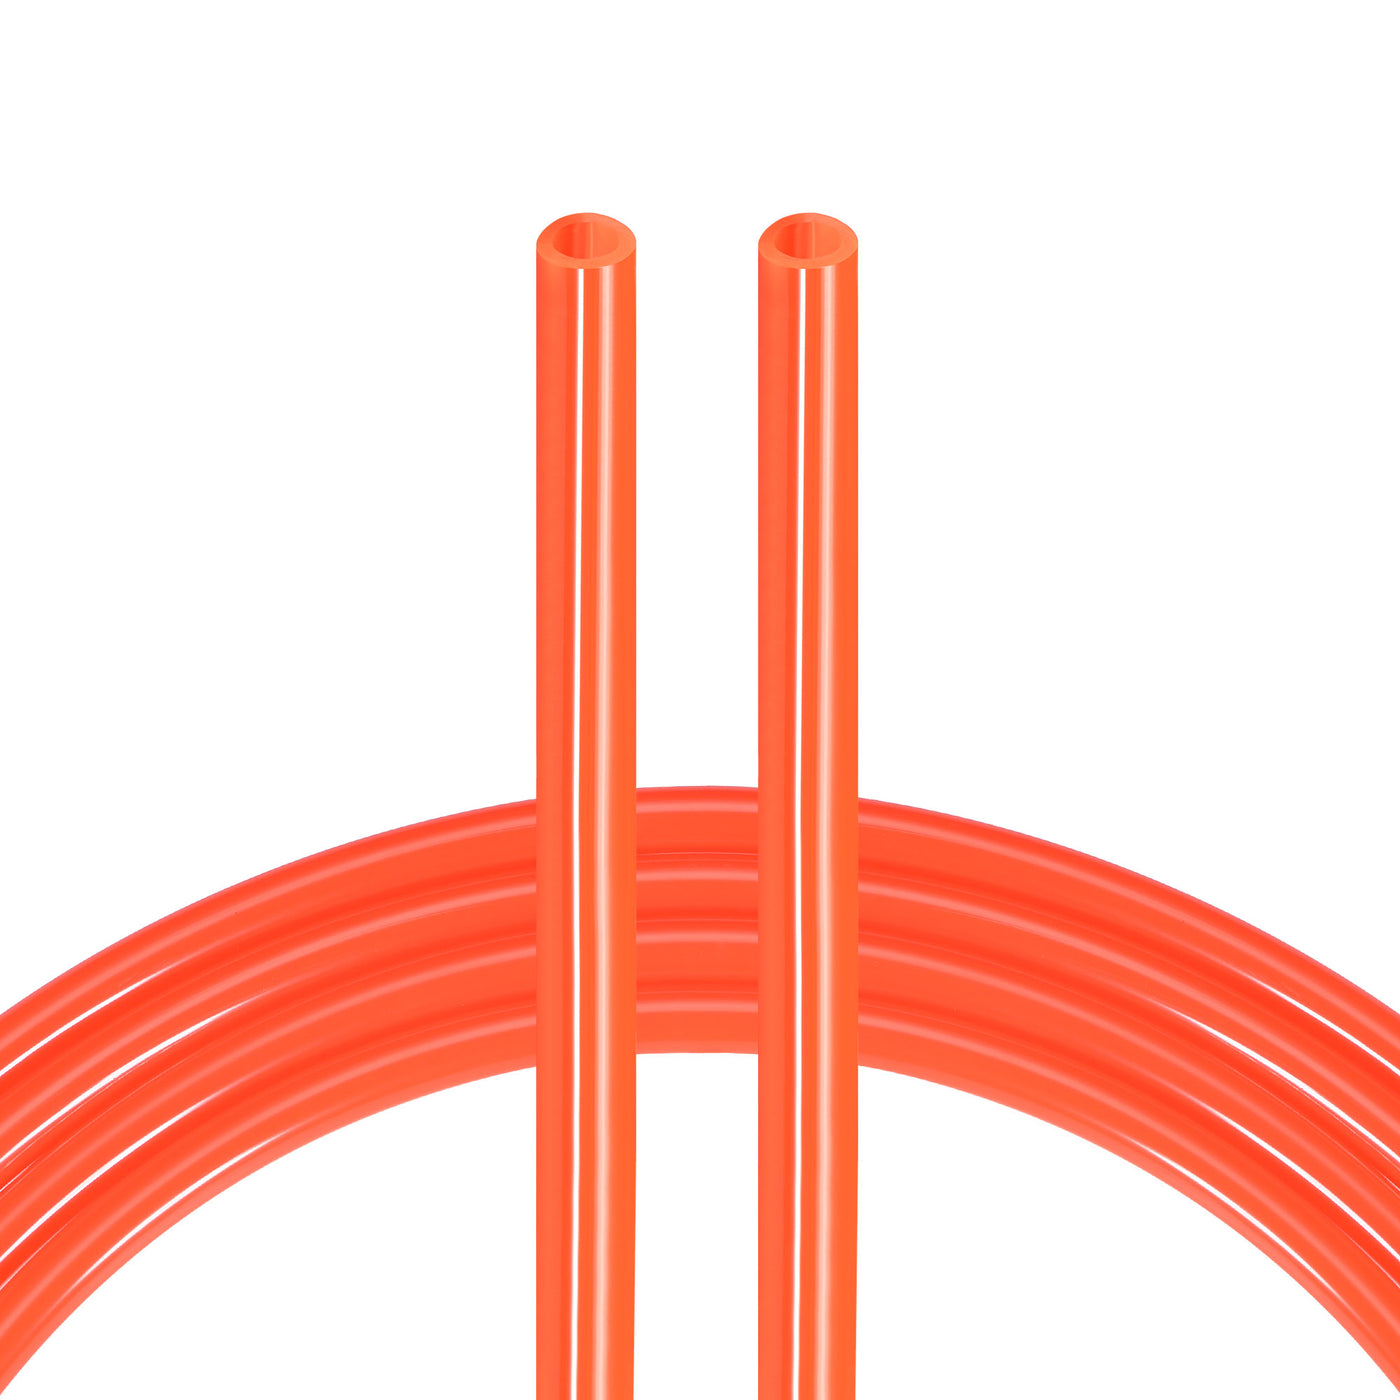 uxcell Uxcell Pneumatic Air Hose Tubing Air Compressor Tube 6.5mm/0.25''ID x 10mm/0.4''OD x 8m/26.2Ft Polyurethane Pipe Bright Orange